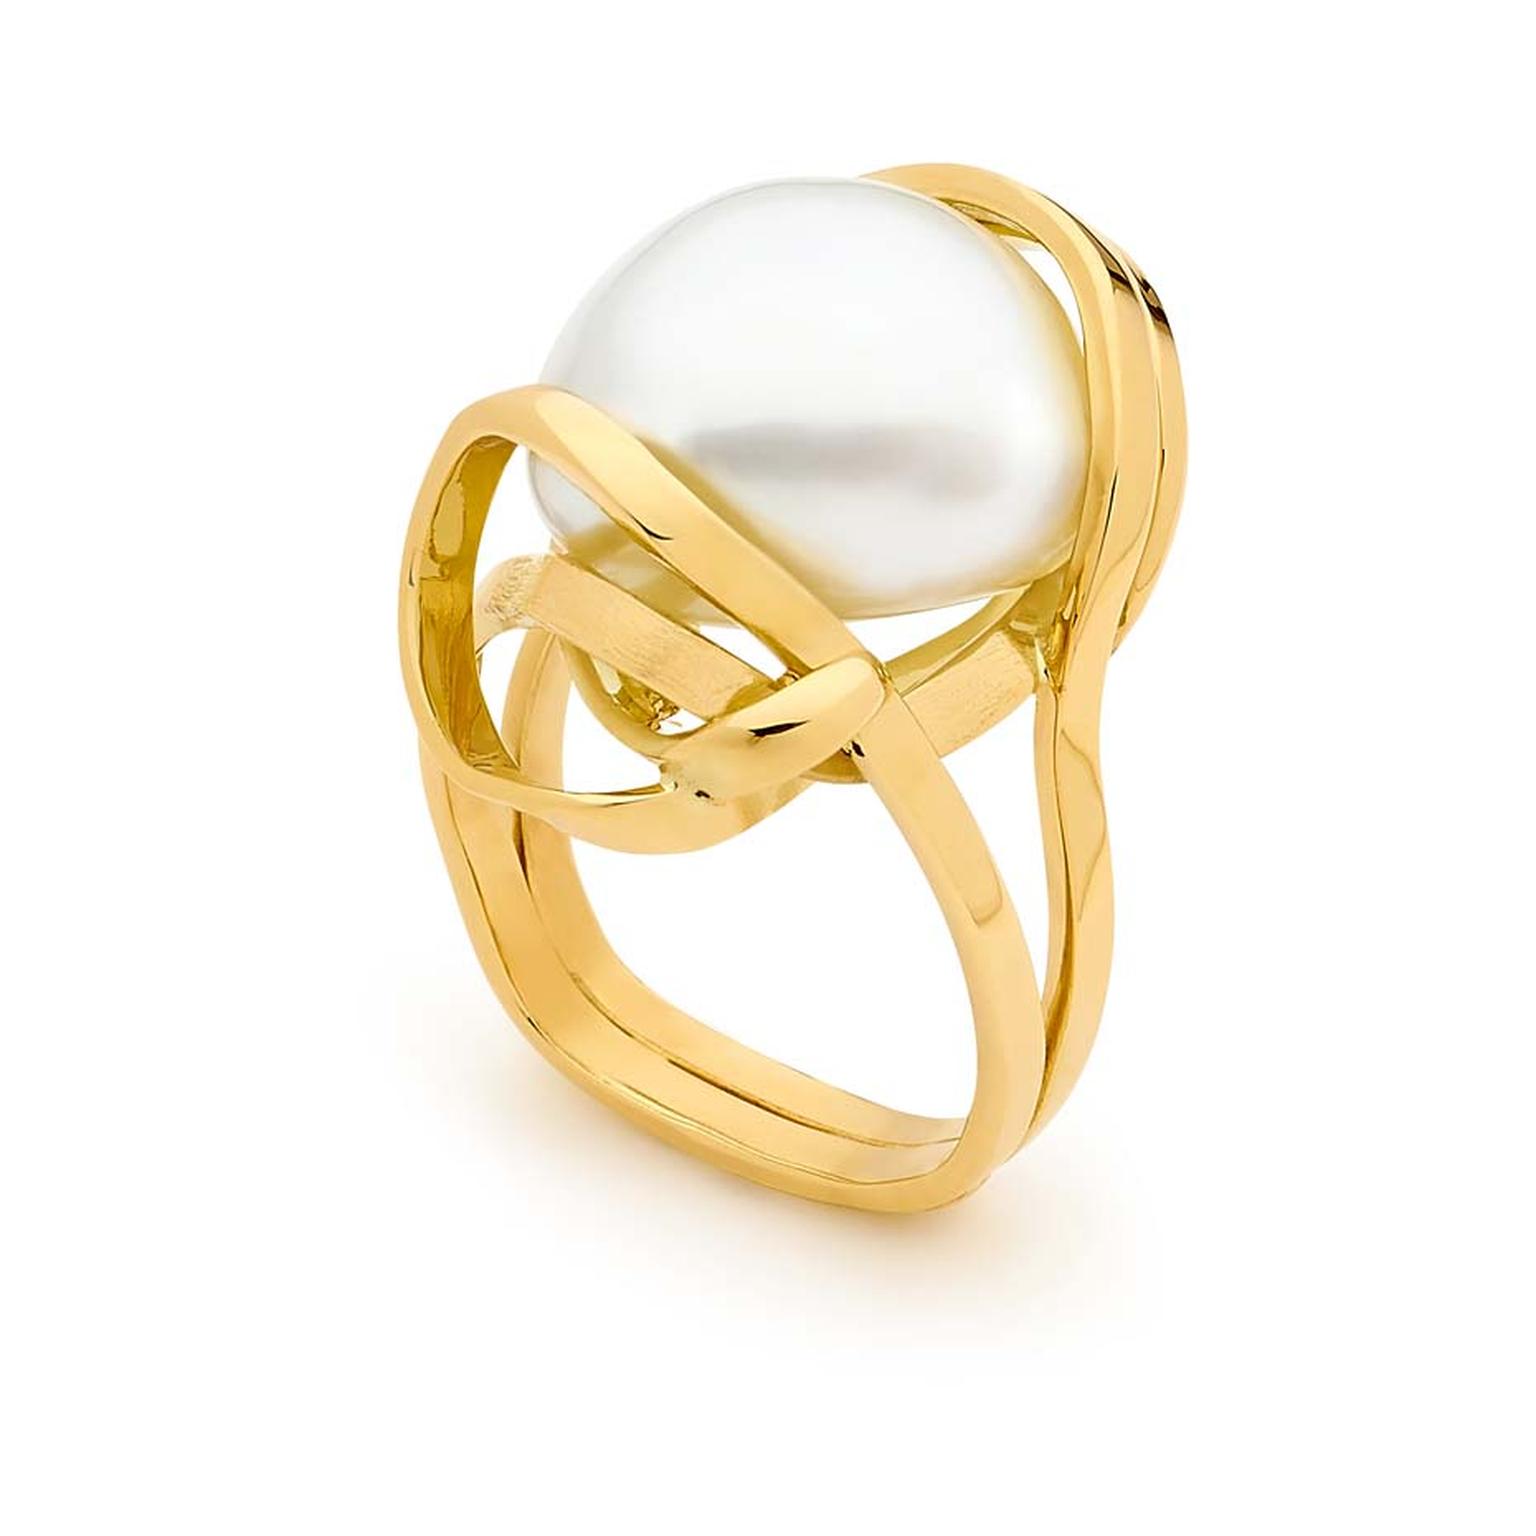 Linneys ring in yellow gold with an Australian South Sea pearl.